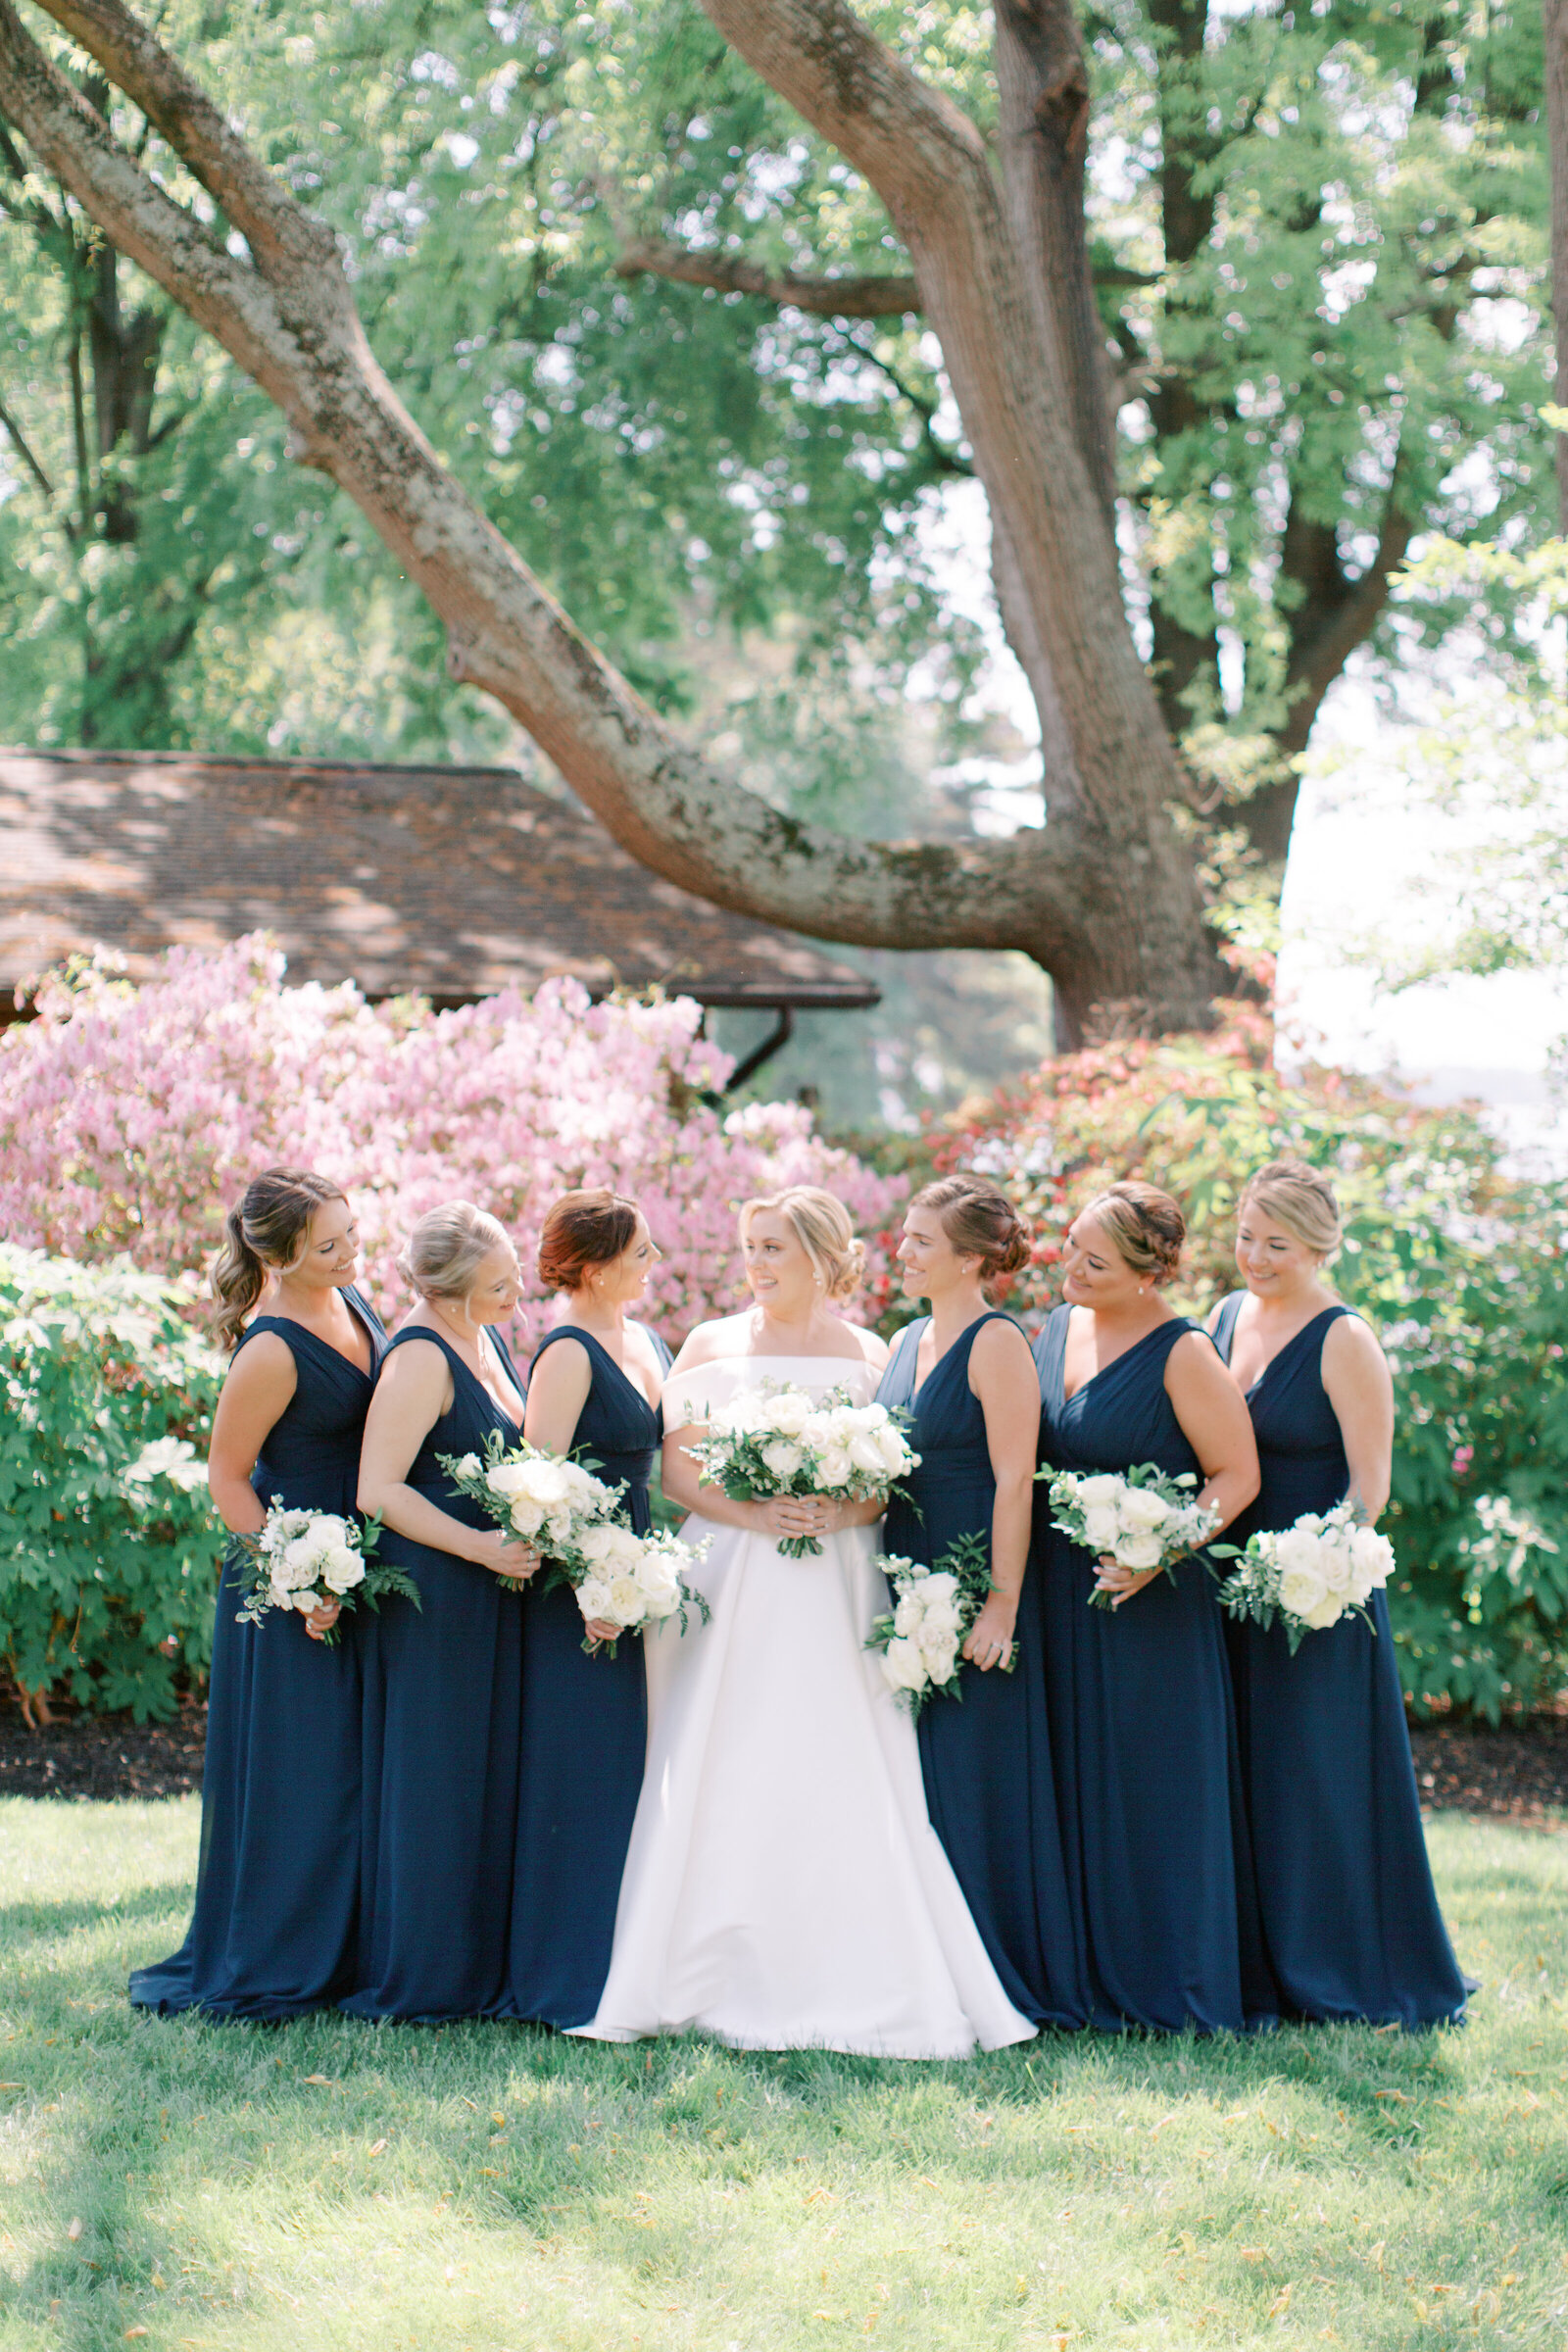 Virginia-Beach-Wedding-Planners-Sincerely-Jane-Events-25